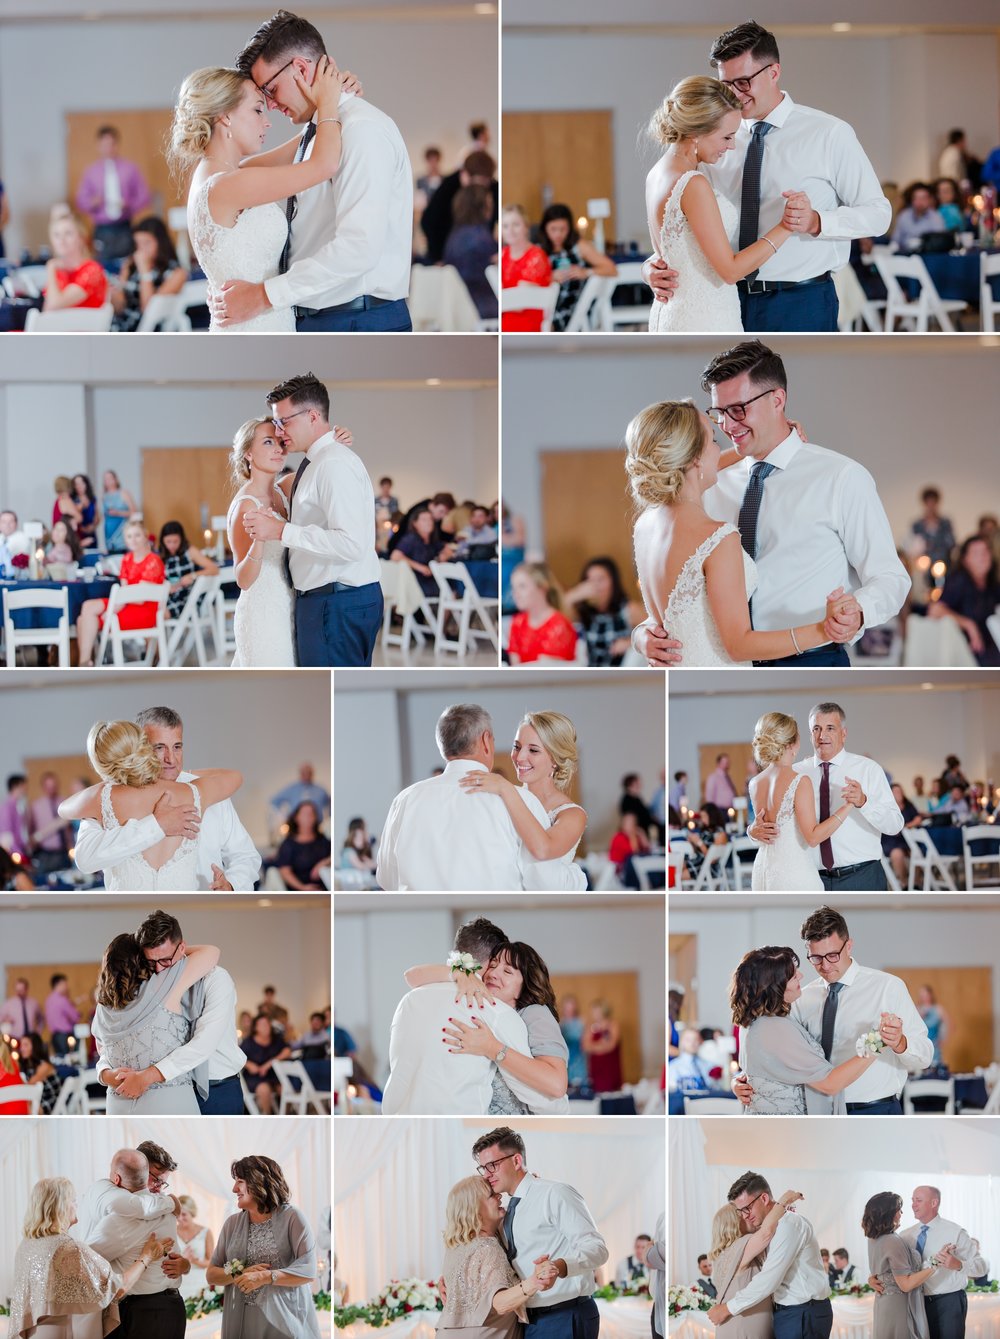  wedding_photography_reception_navy_gold_ideas_first_dance_pics_cake_details 9 